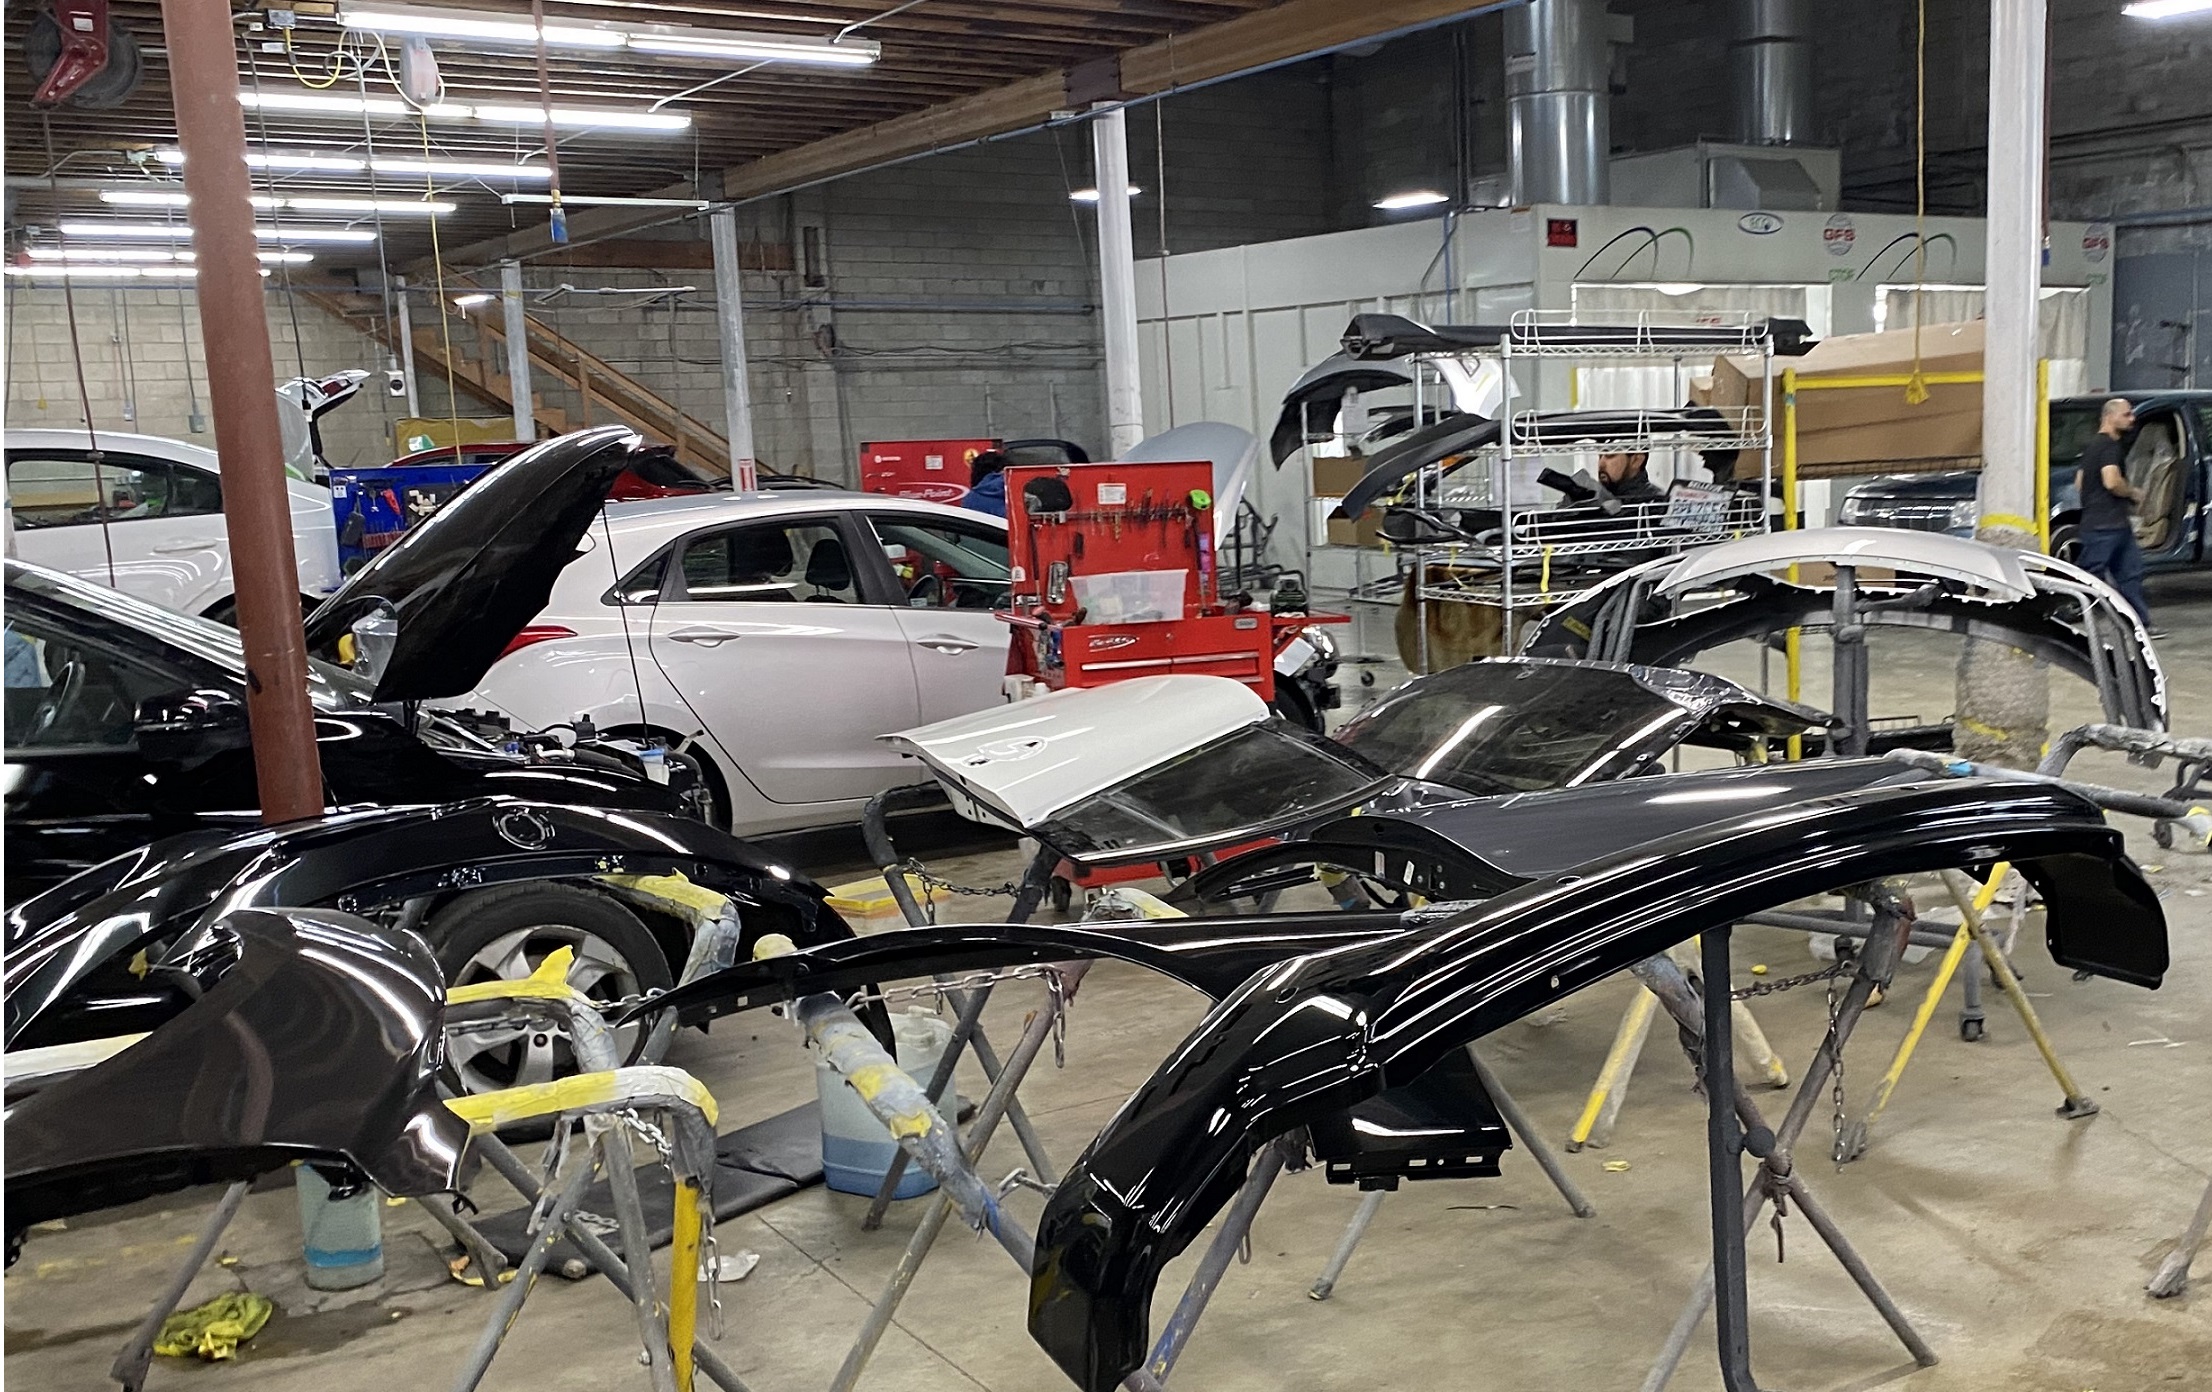 Different car parts seen in the foreground with vehicles in the background inside an autobody shop